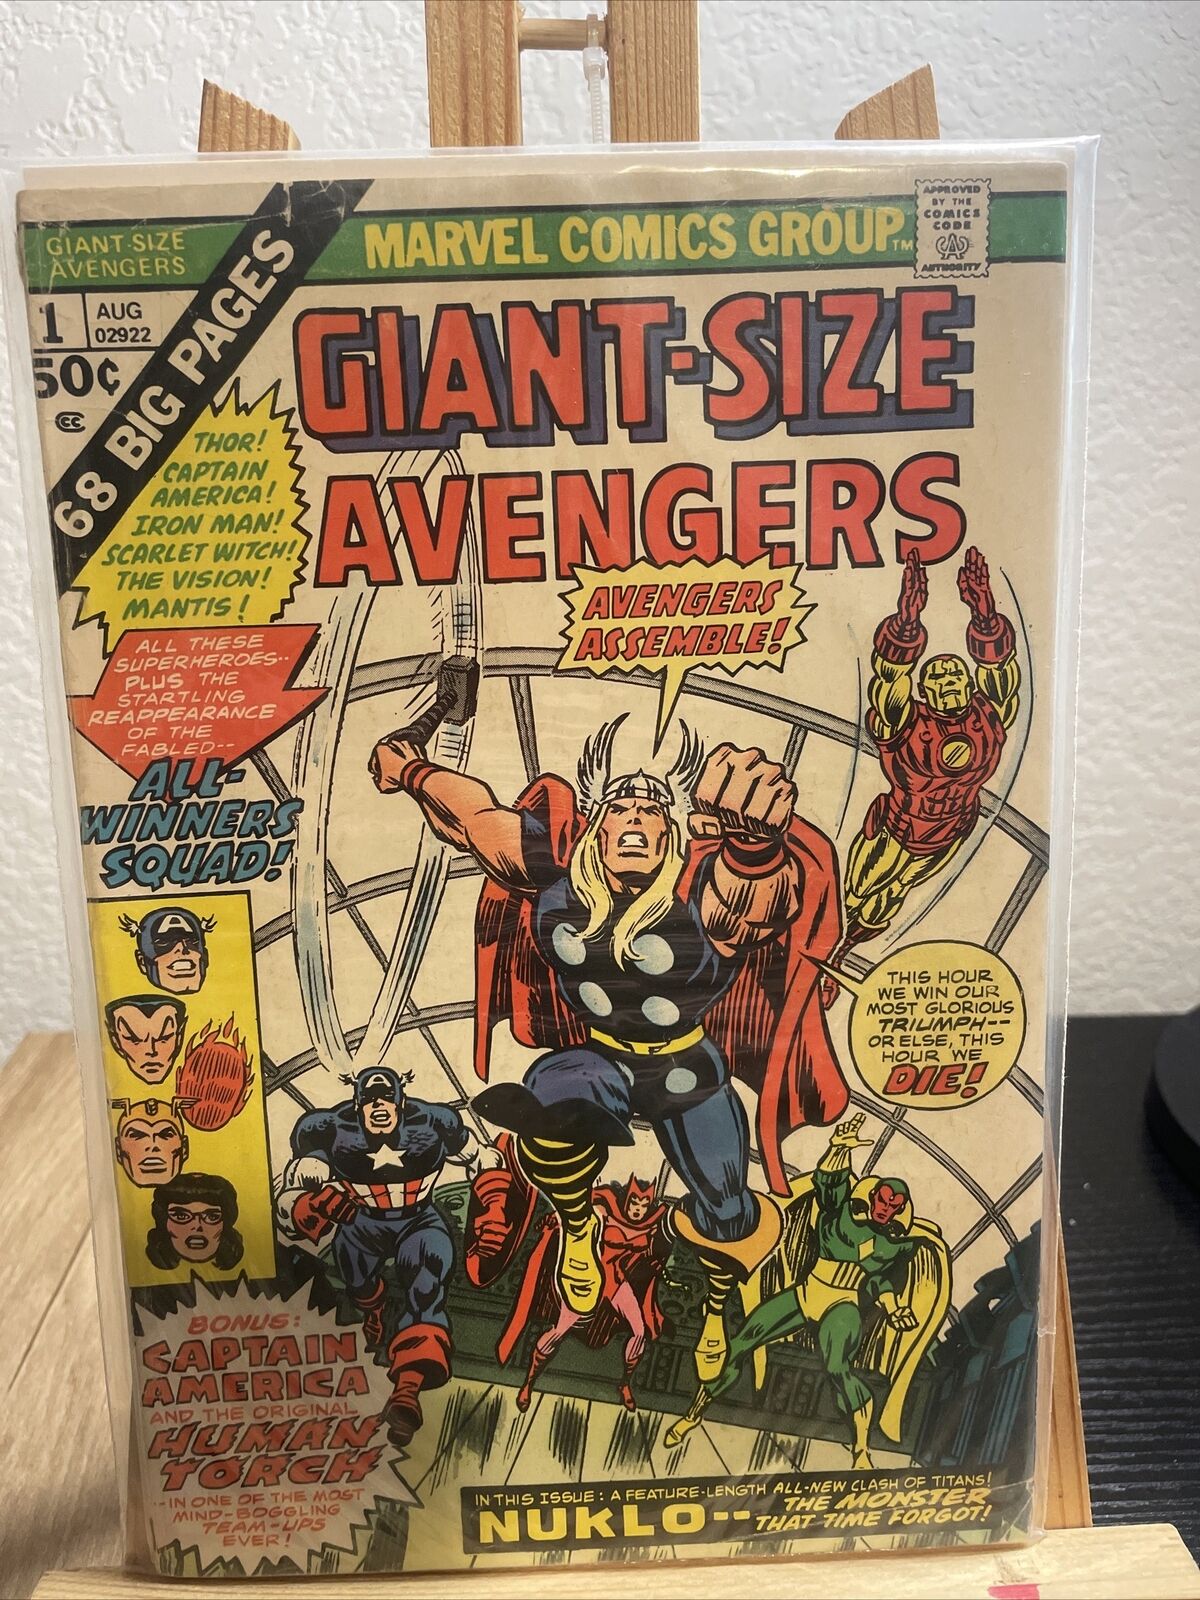 GIANT-SIZE AVENGERS # 1 2 3 4 5 Complete Series Lot of 5 VG+